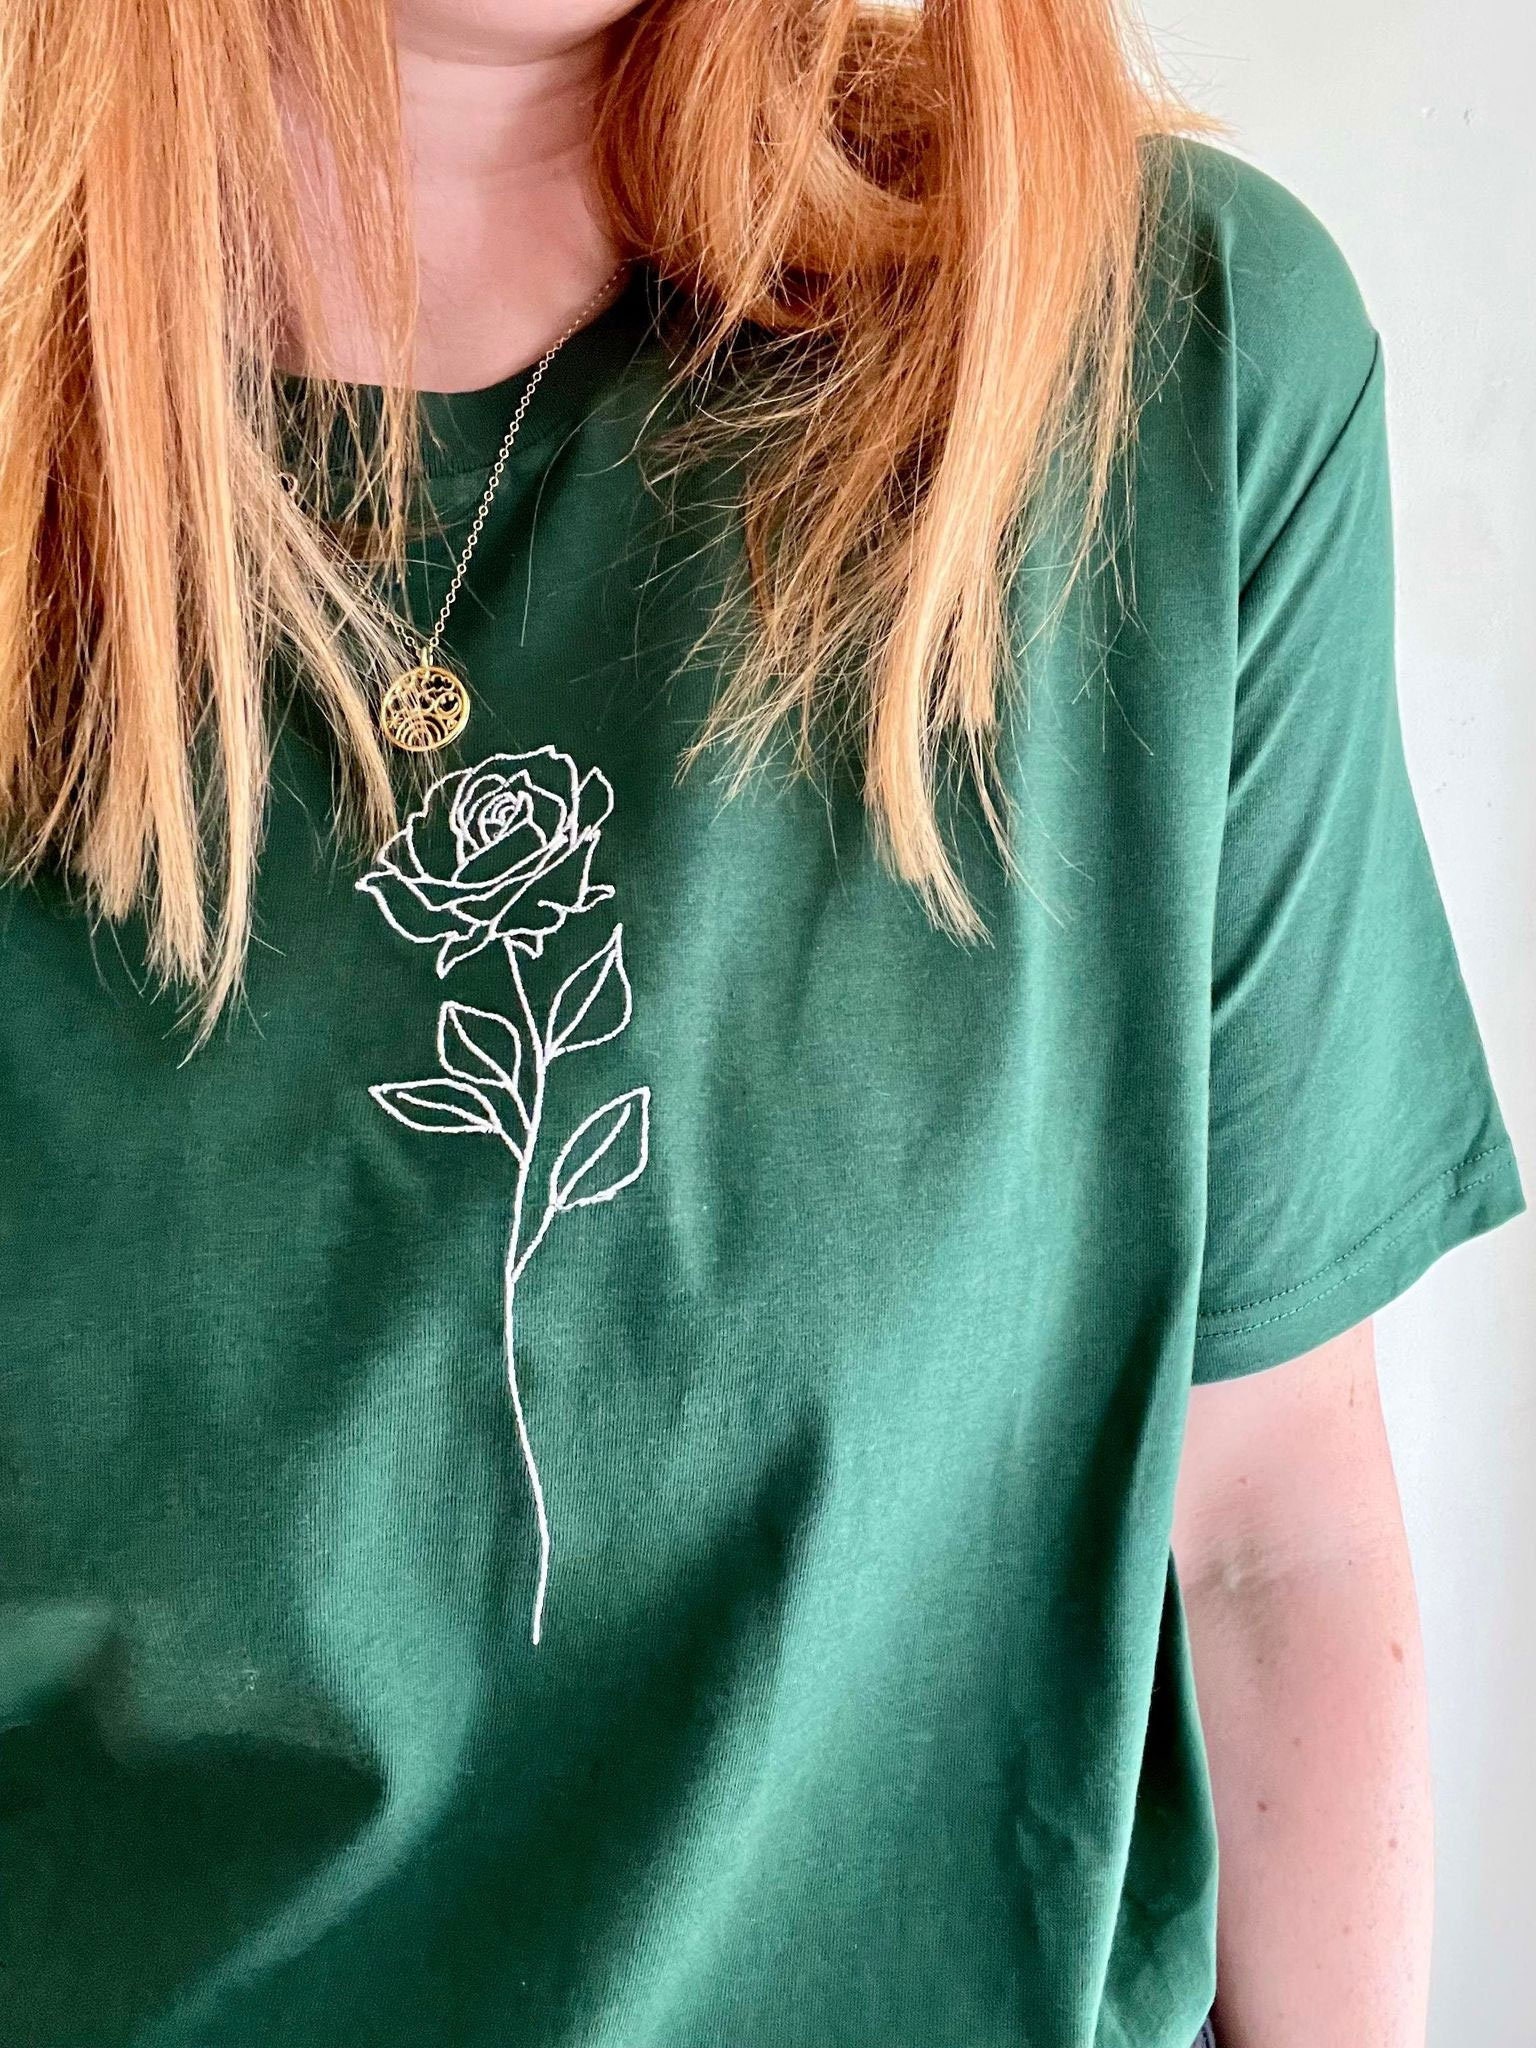 Top Single - Rose Designs Sustainable Hand Soft Organic Rose Etsy Clothing Unique Embroidered Drawn T-shirt